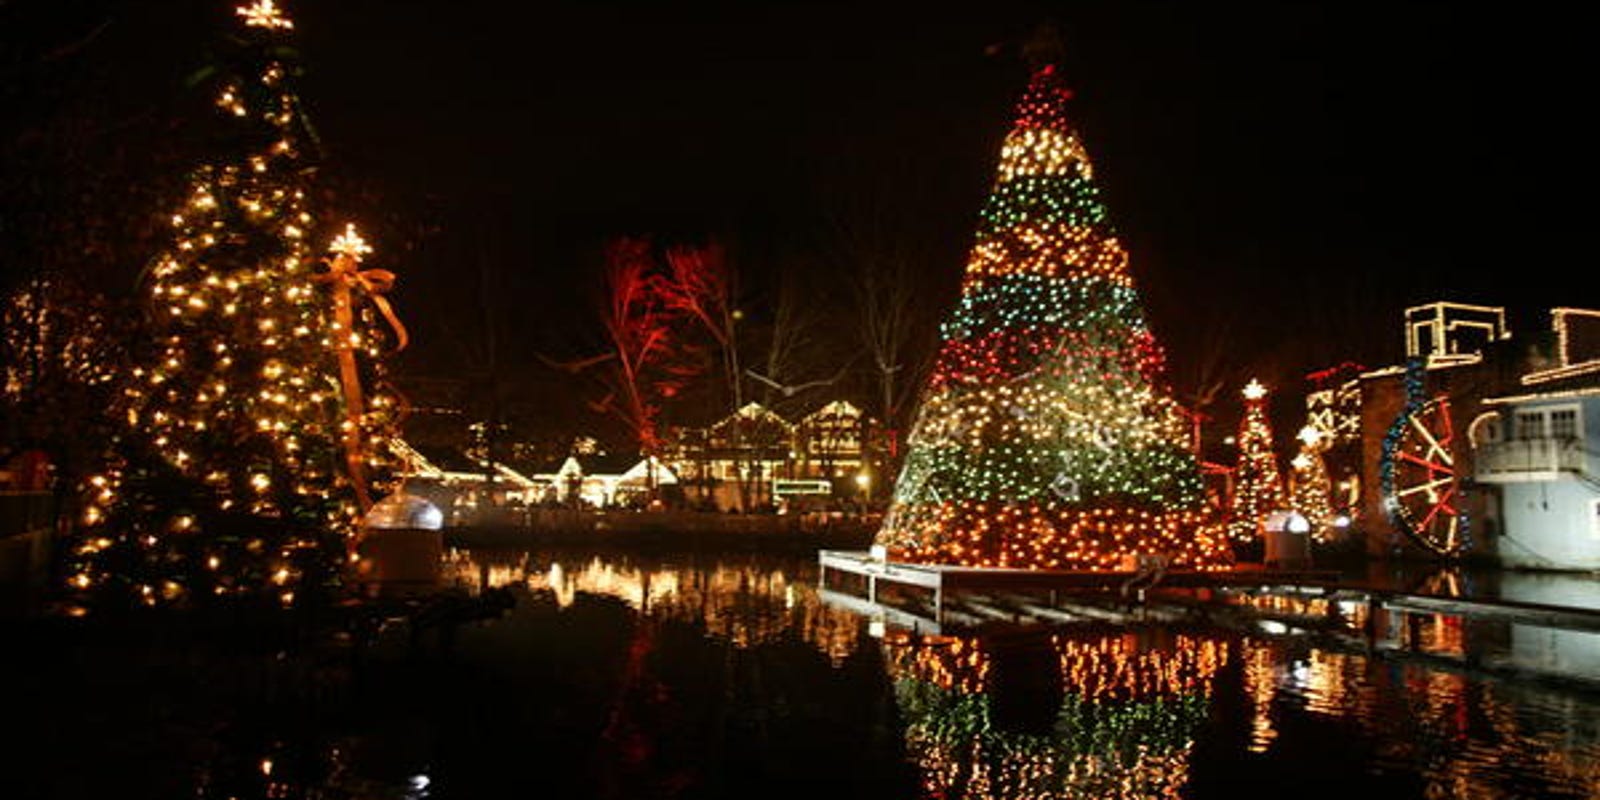 6 spots to see Christmas lights in East Tennessee